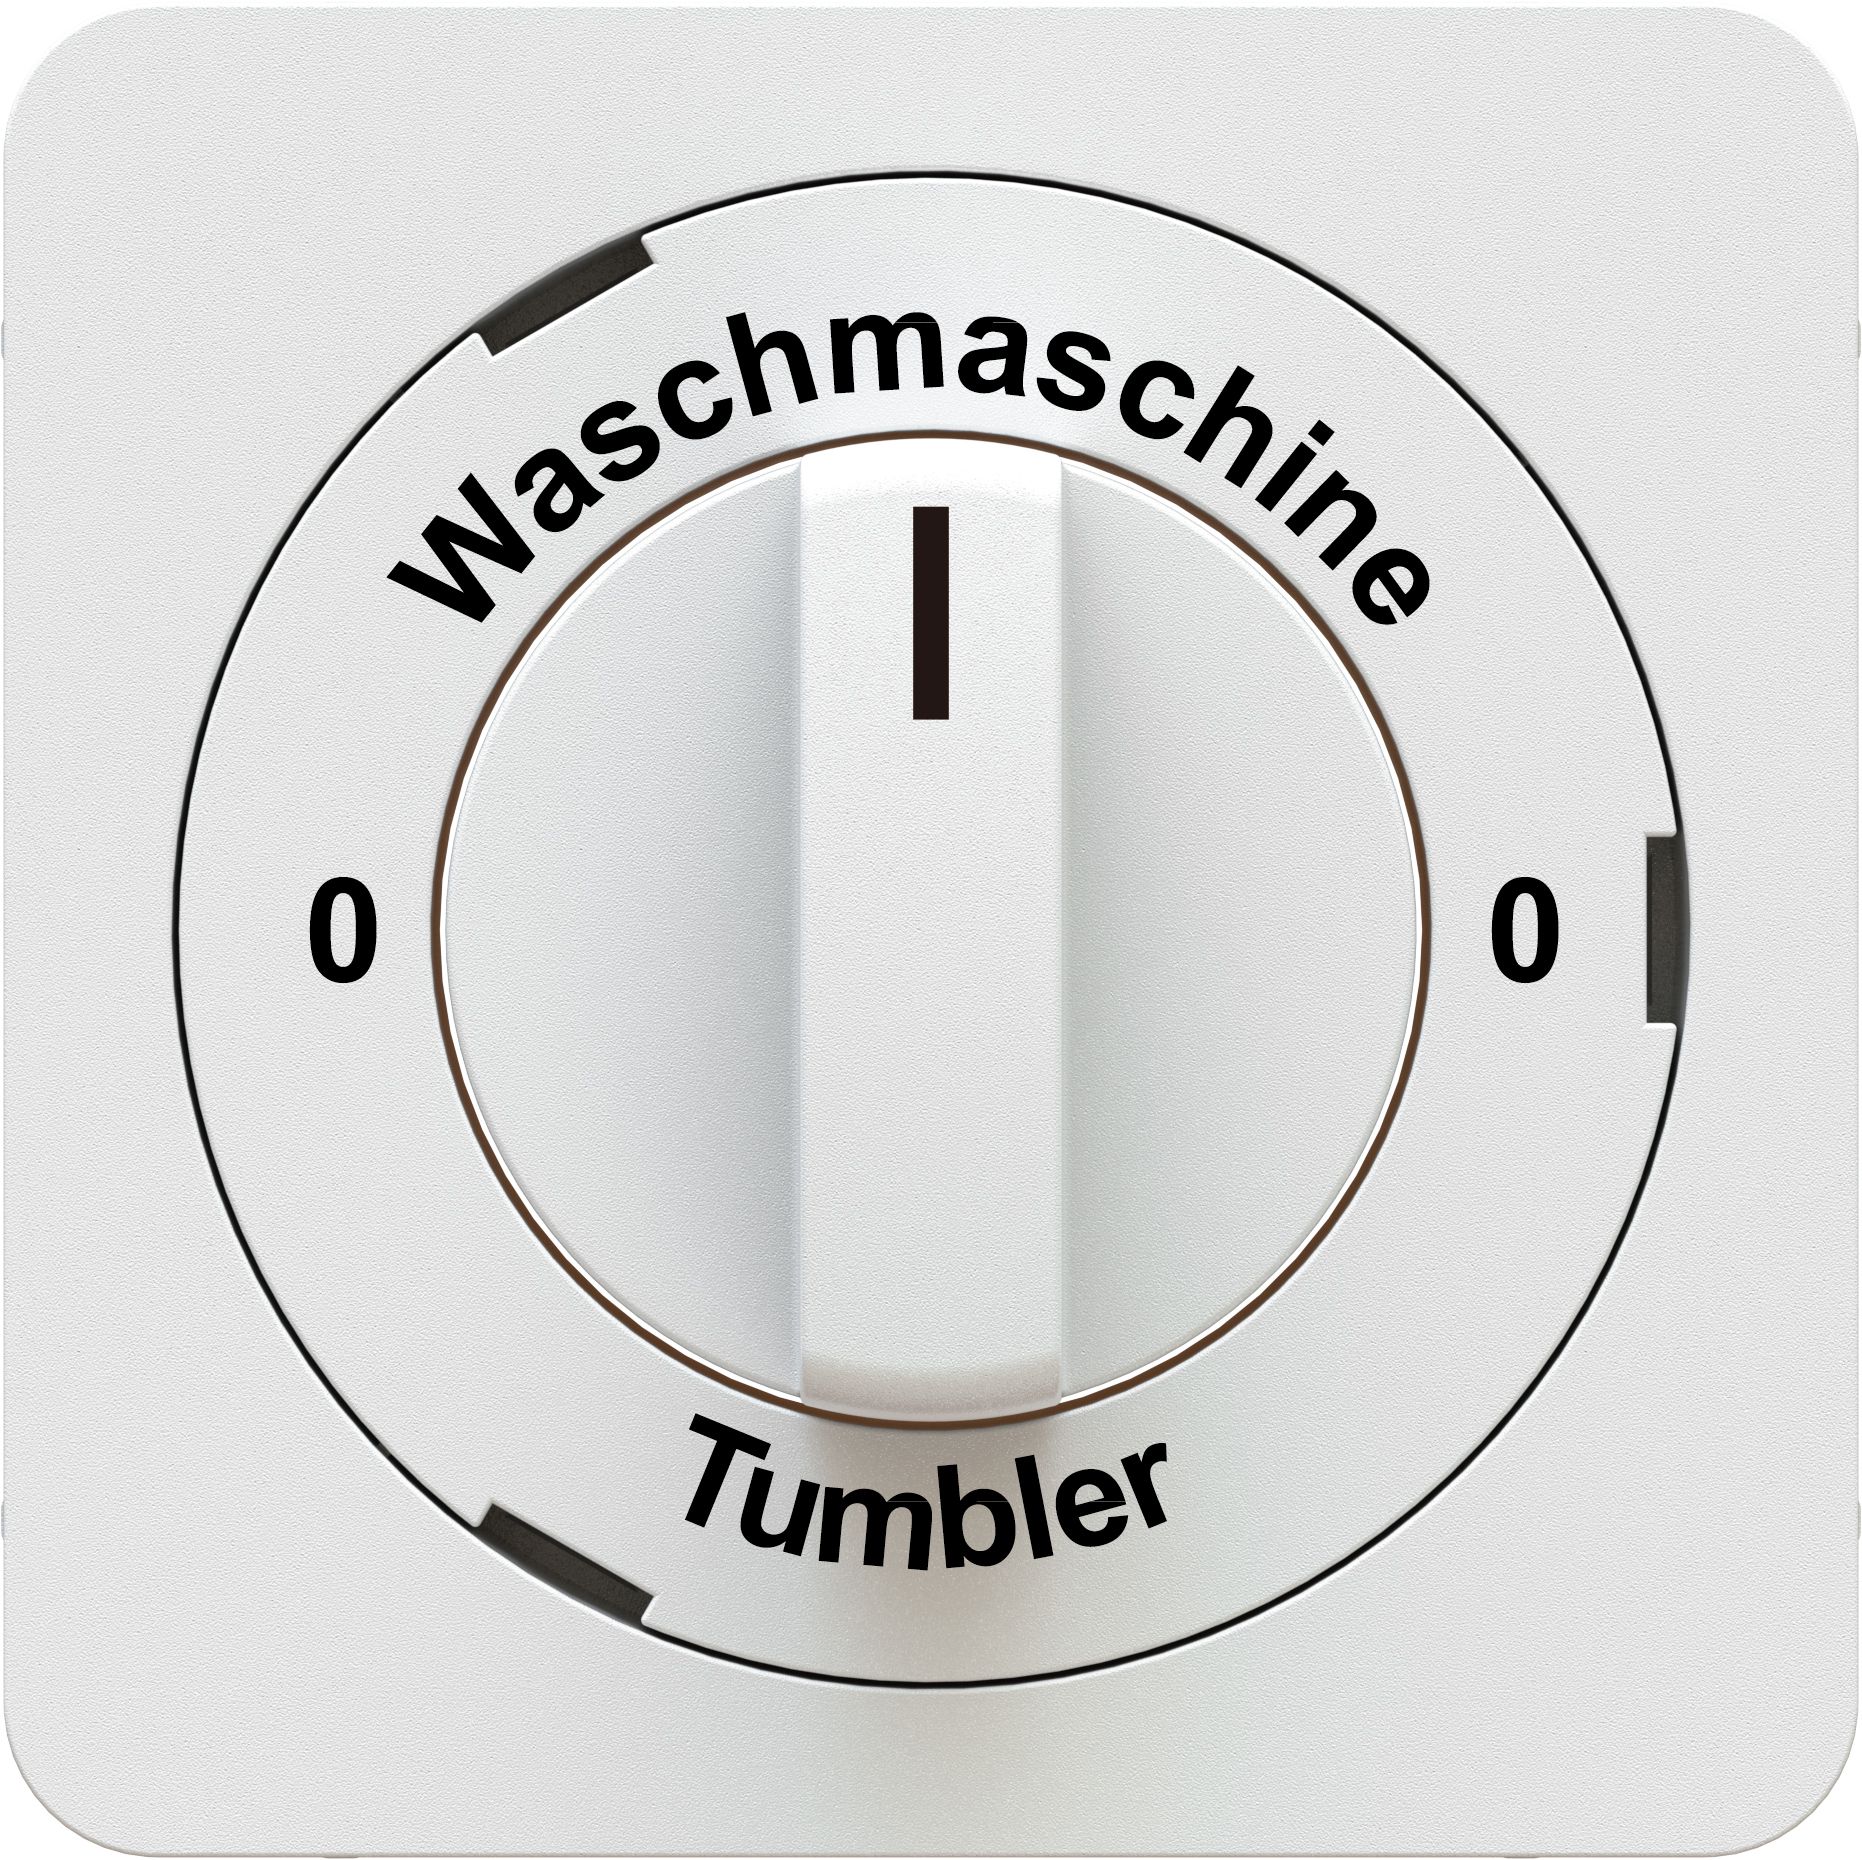 Front plates for turnable switch 0-Wasch.-0-Tumbler